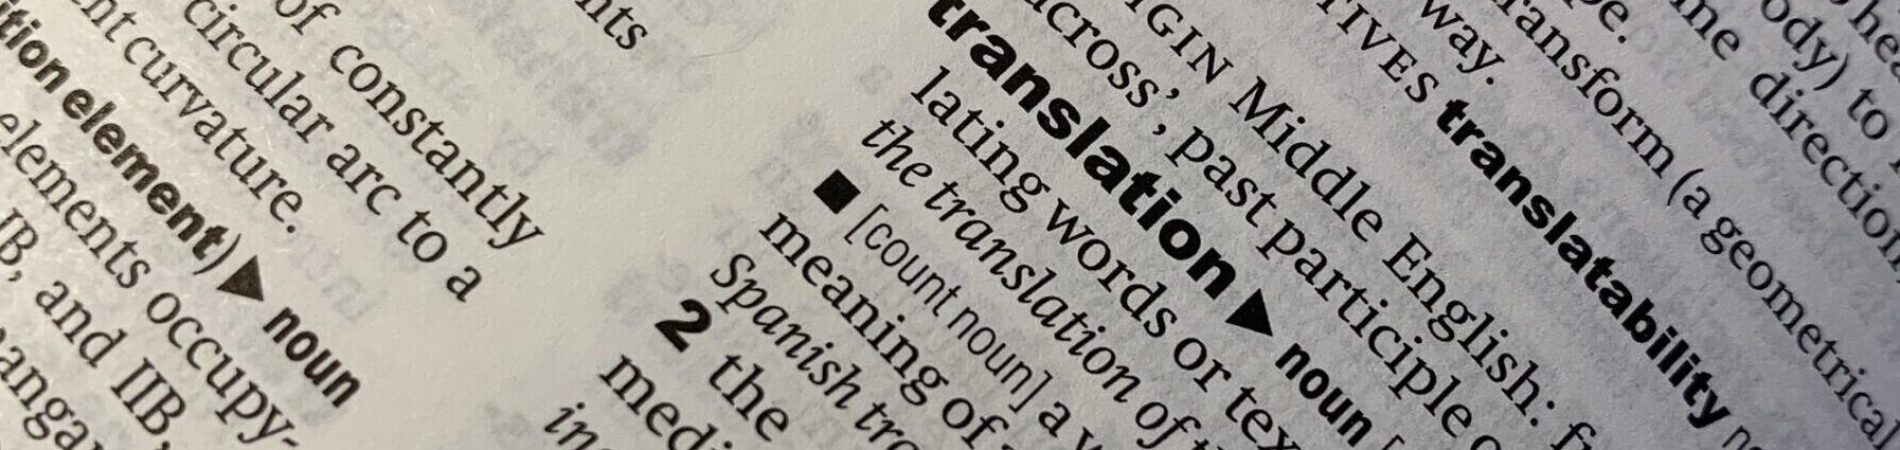 dictionary definition of translation